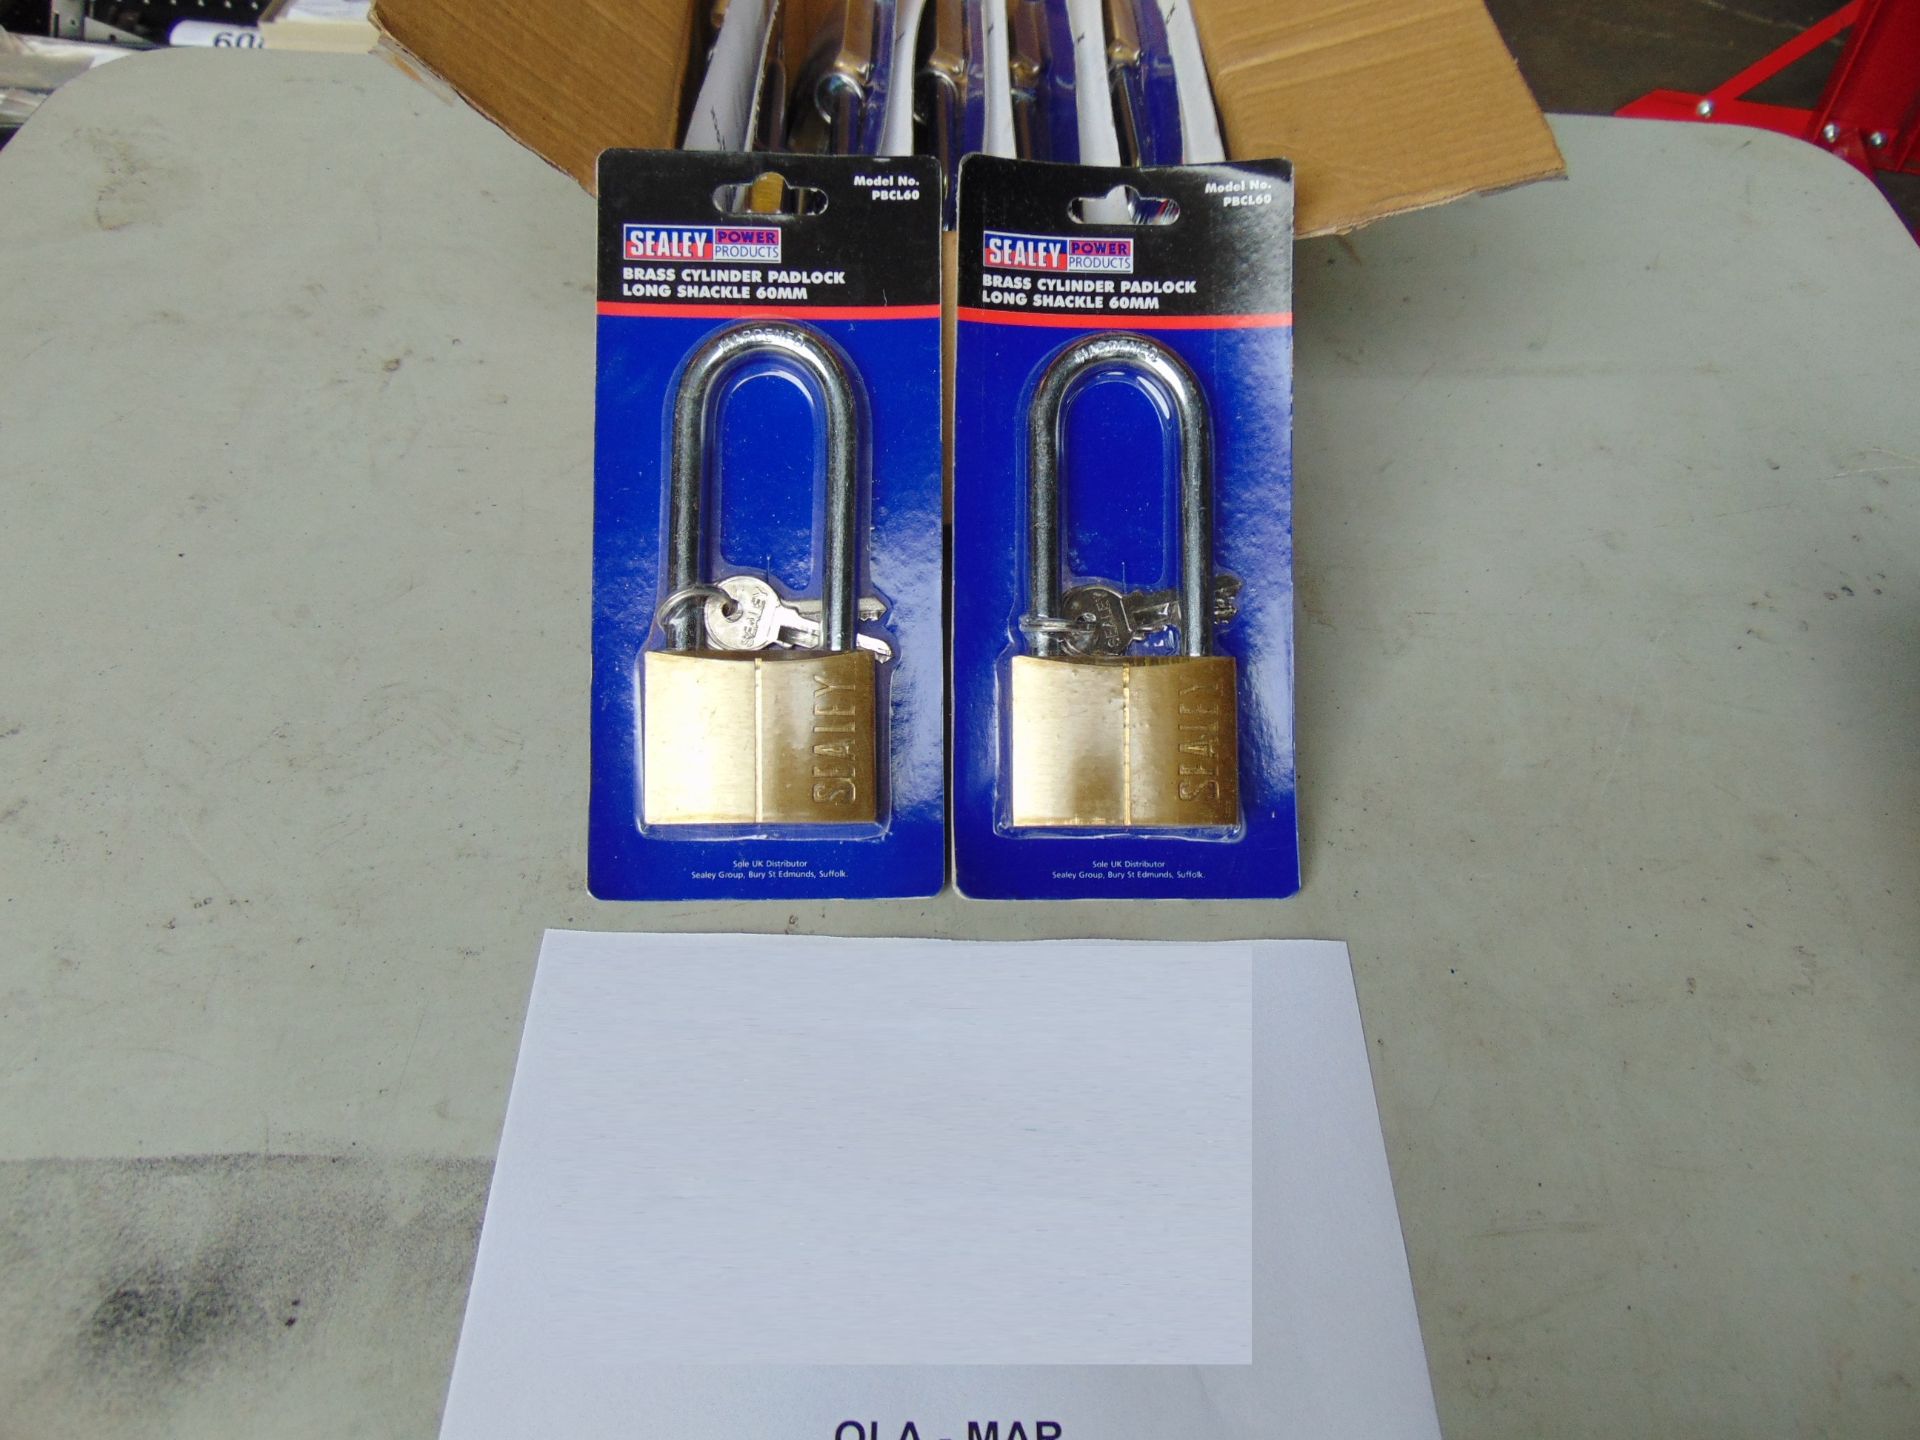 12 x Sealey Brass Long shank Cylinder Padlock New Unissued in original packing - Image 3 of 3